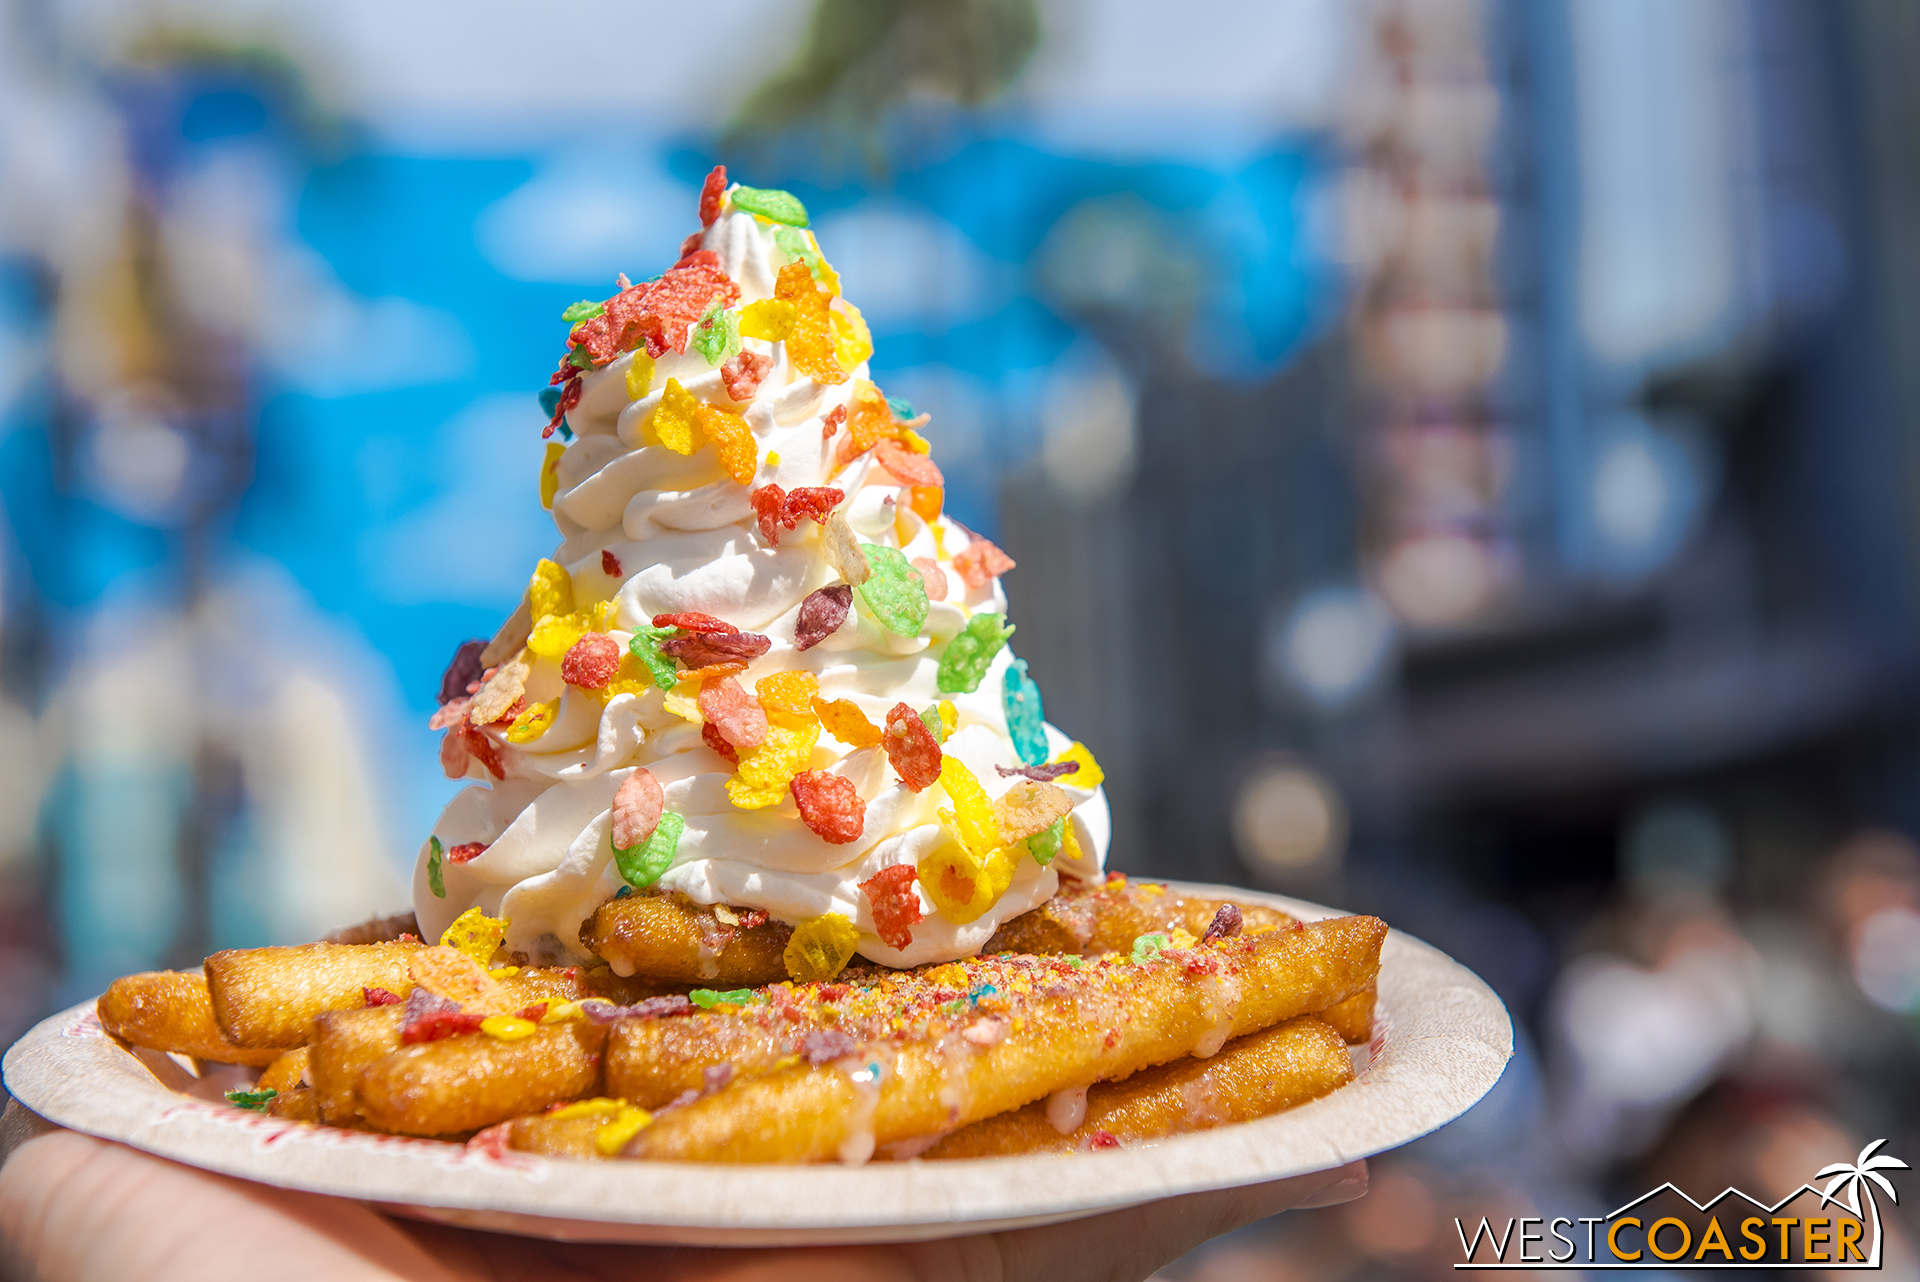  These Funnel Cake Fries would kill Dan, but for the non-diabetics, are a sweet treat. 